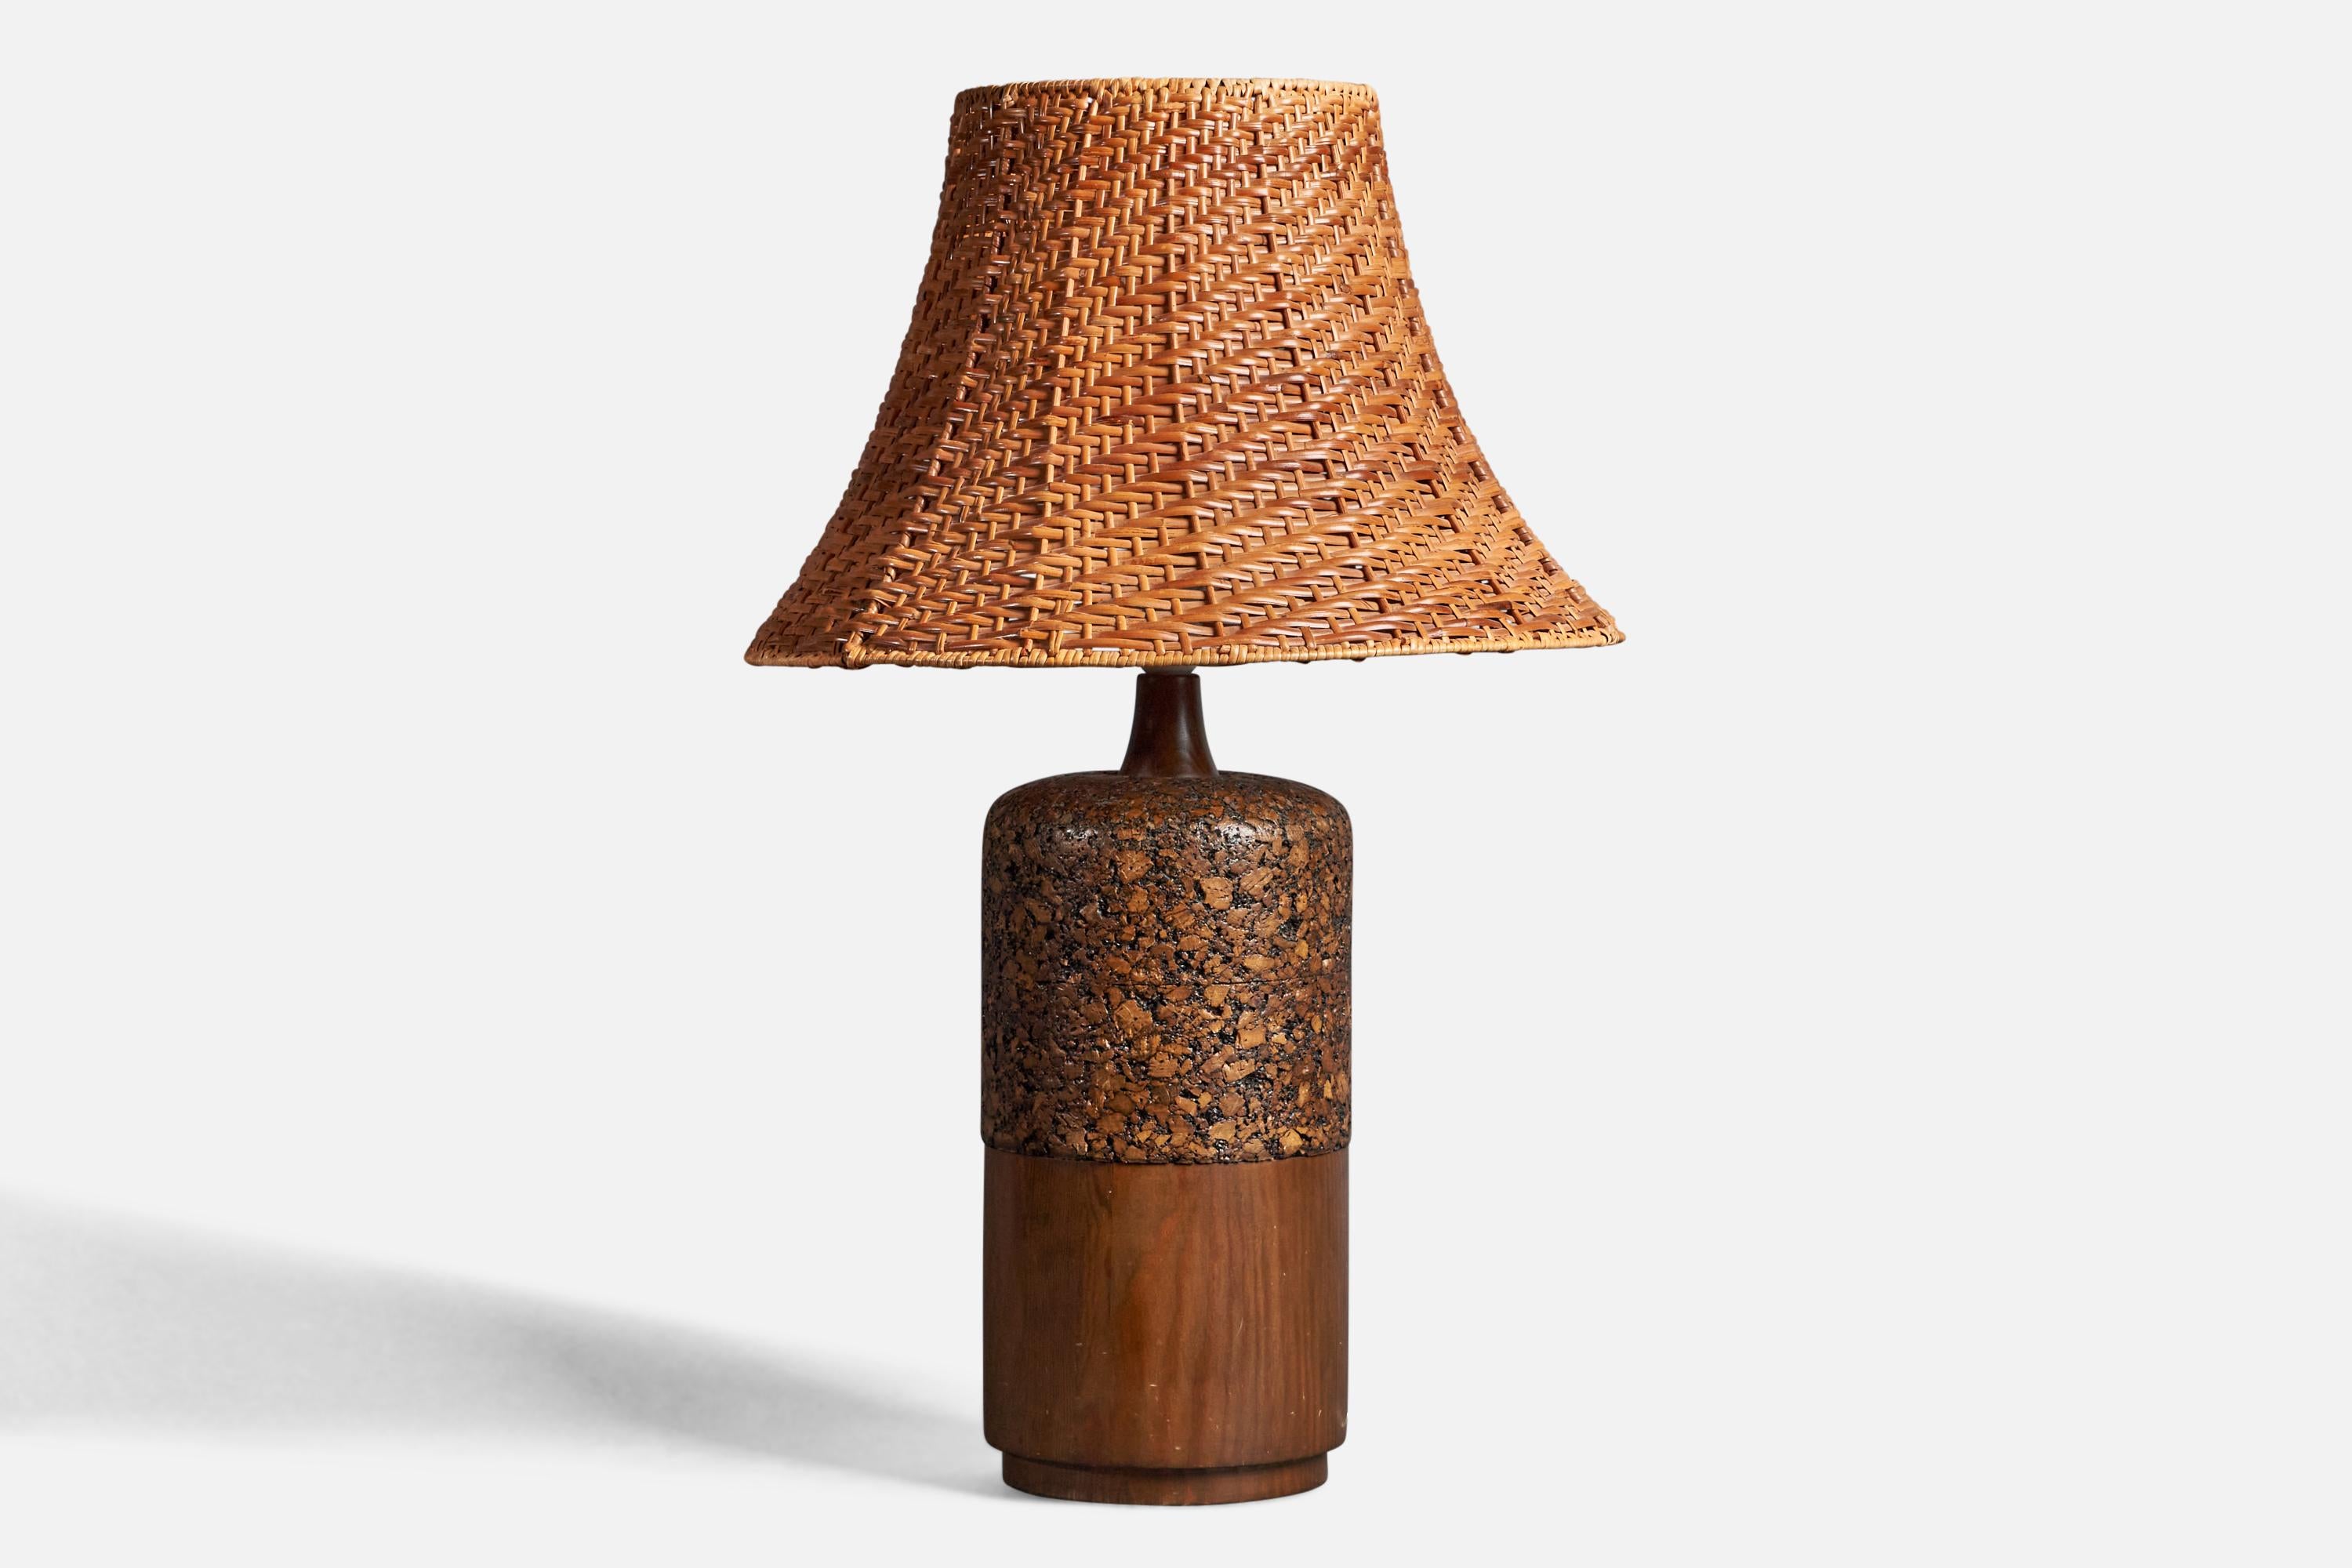 A very large table lamp designed and produced in Sweden, 1950s. In solid stained pine. Stained cork.

Stated dimensions exclude lampshade, height includes socket. Sold without lampshade.